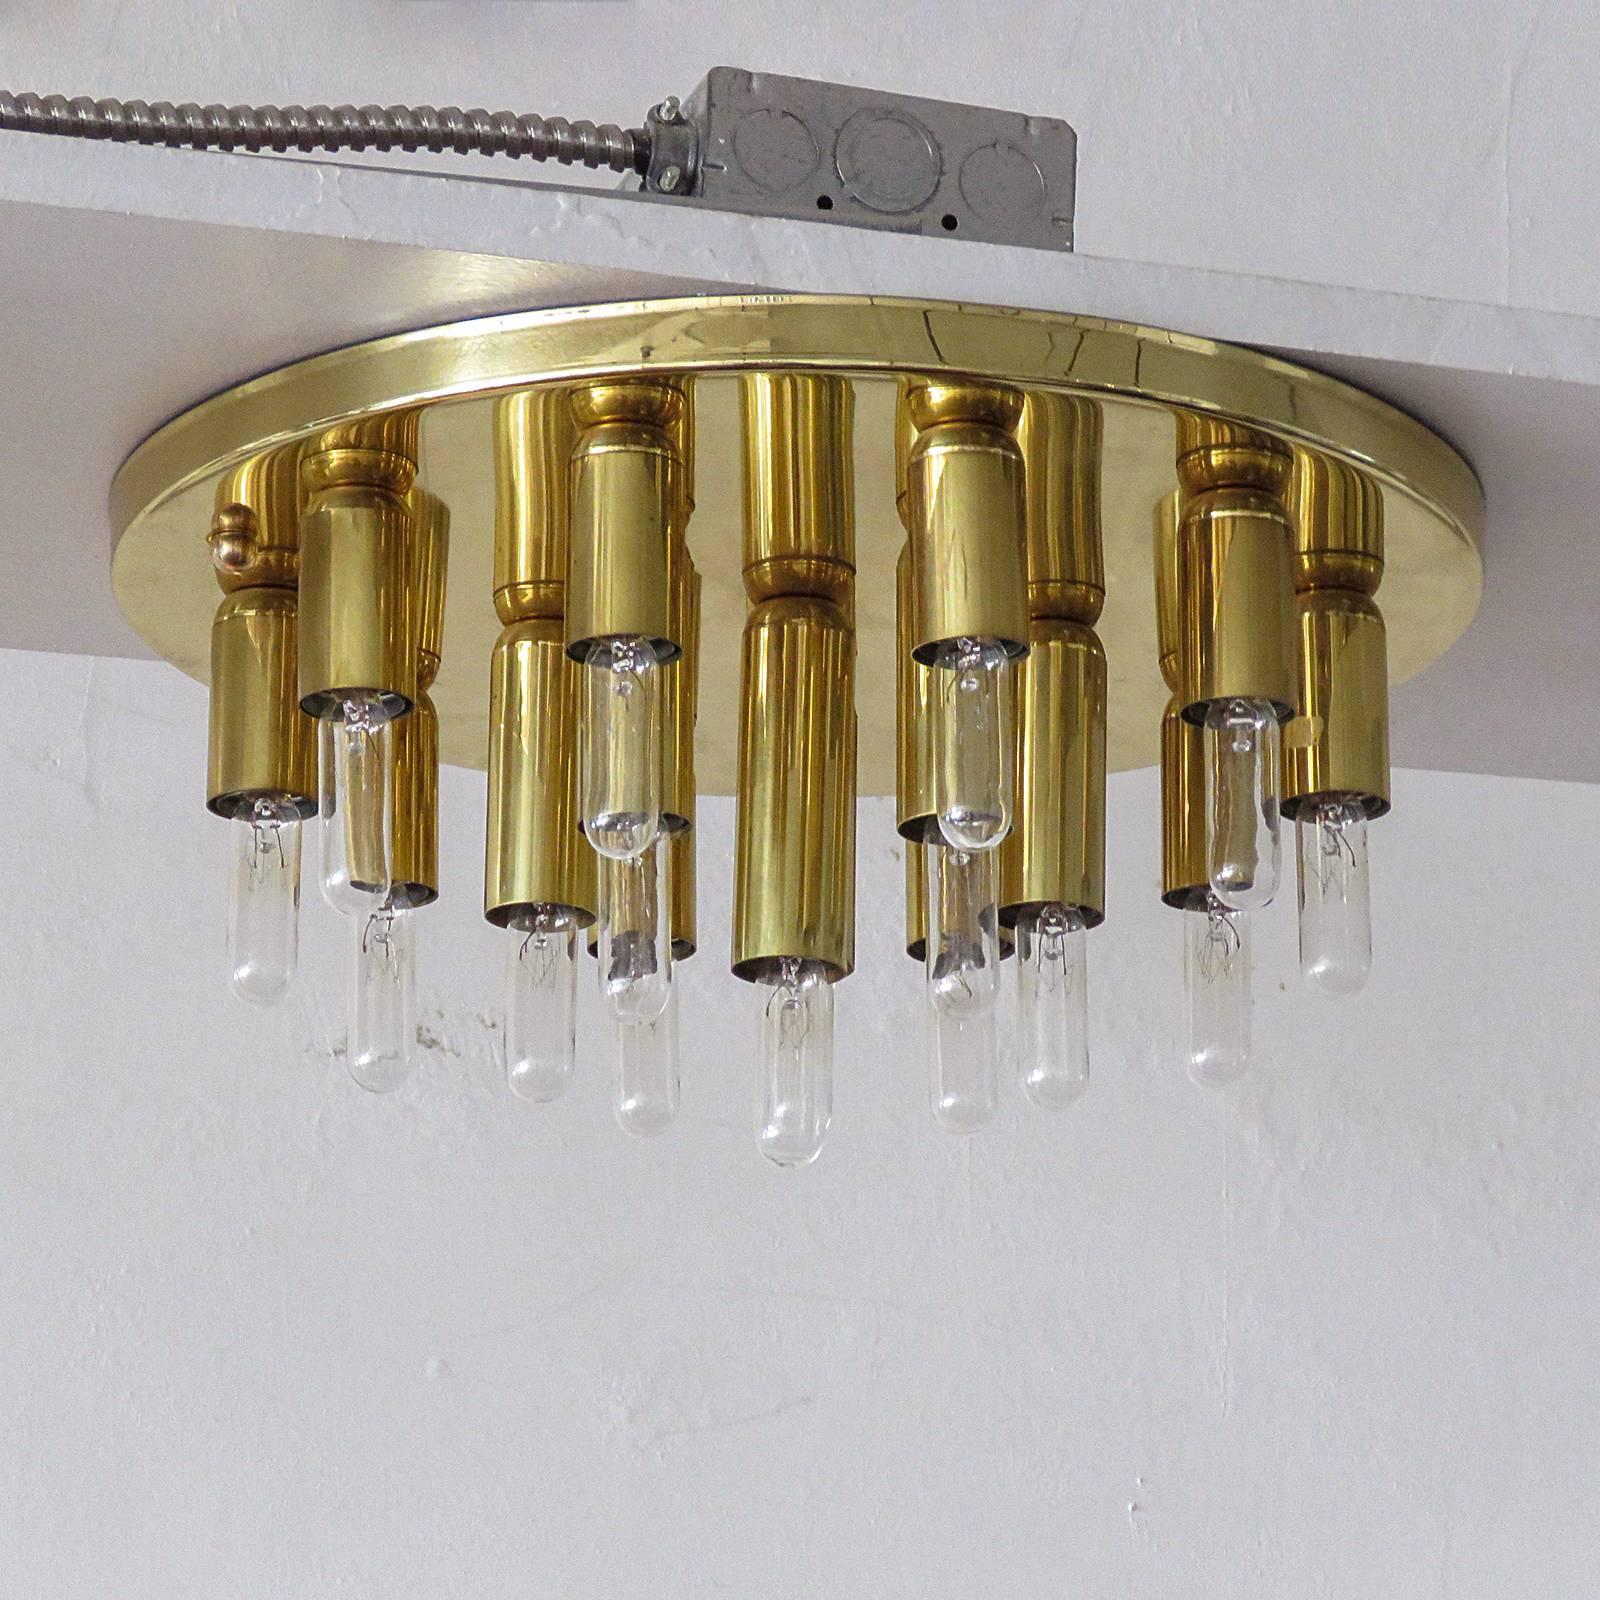 stunning circular 16-light flush mount light panel in brass by Honsel Germany, can be used as wall sconce as well